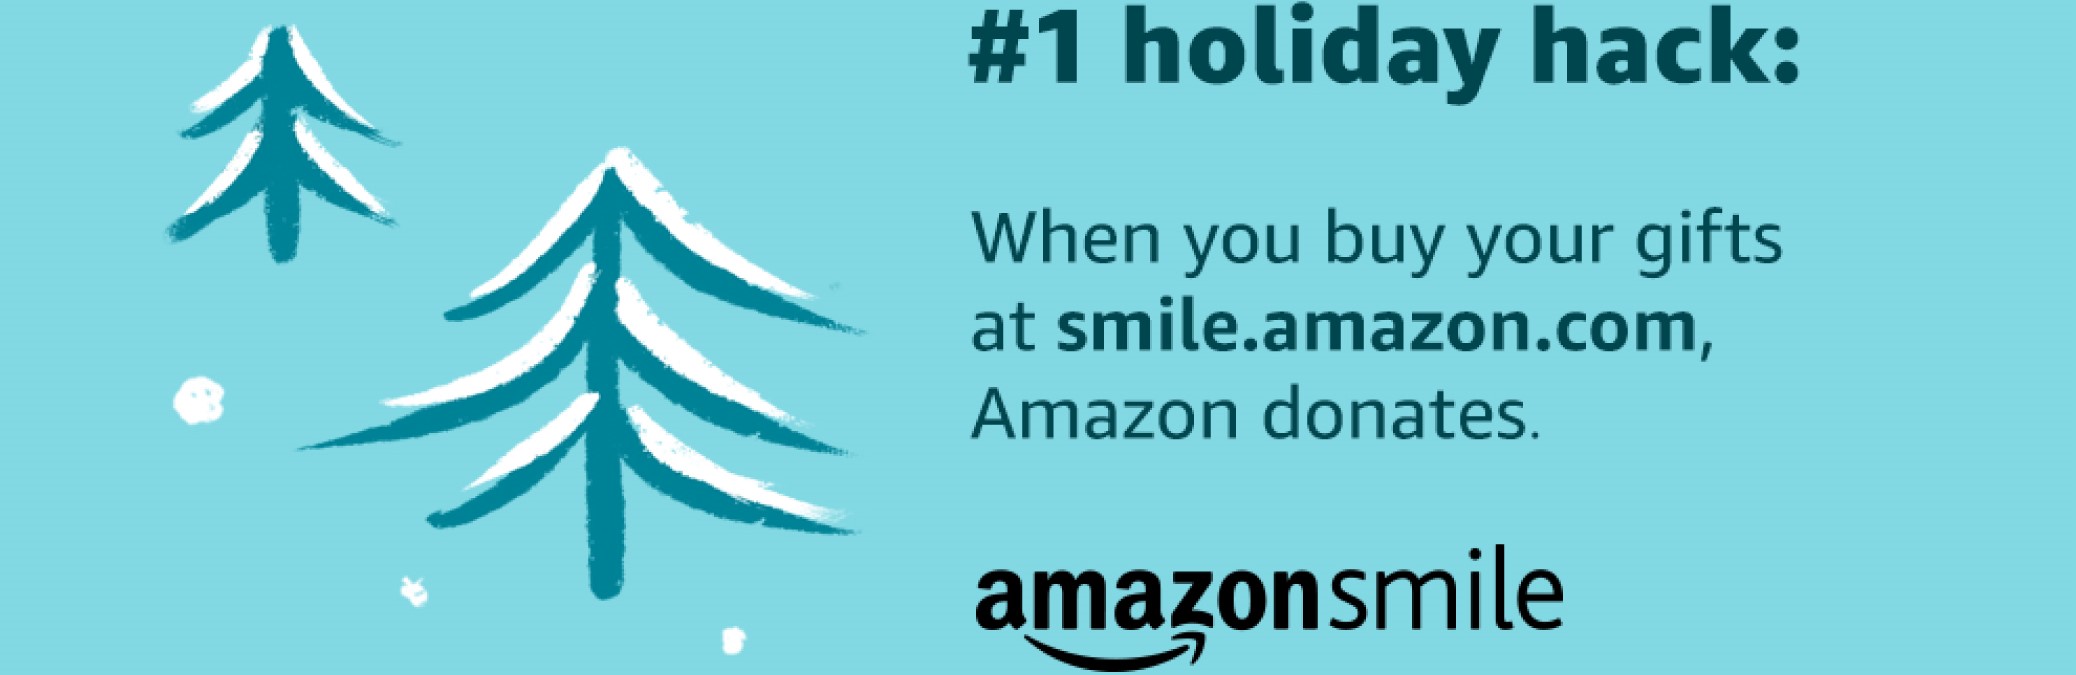 #1 Holiday hack: When you buy your gifts at smile.amazon.com, Amazon donates.